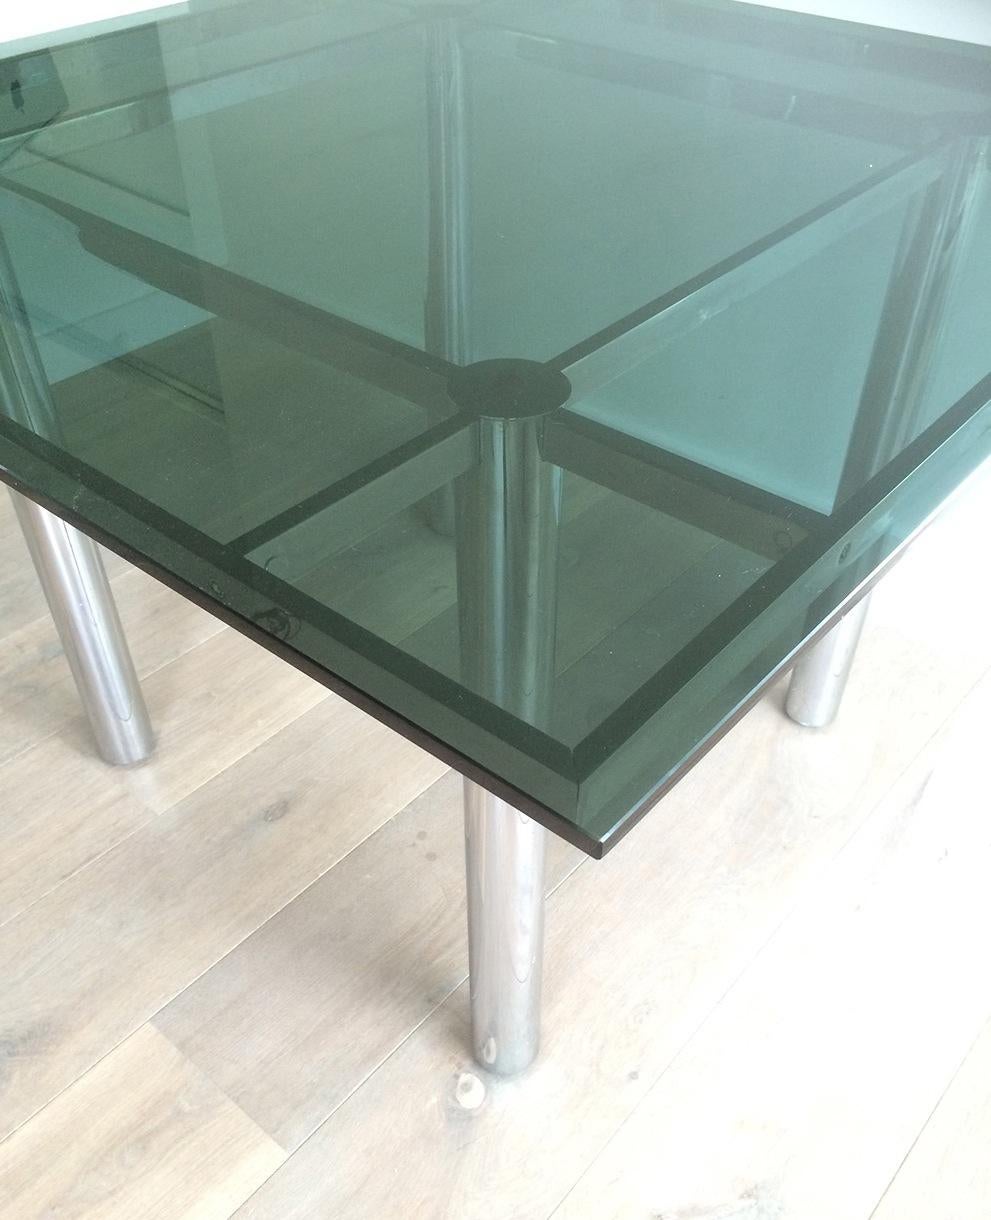 Tobia Scarpa, Nice Chrome Design Dinning Table, Circa 1970 In Good Condition For Sale In Marcq-en-Barœul, Hauts-de-France